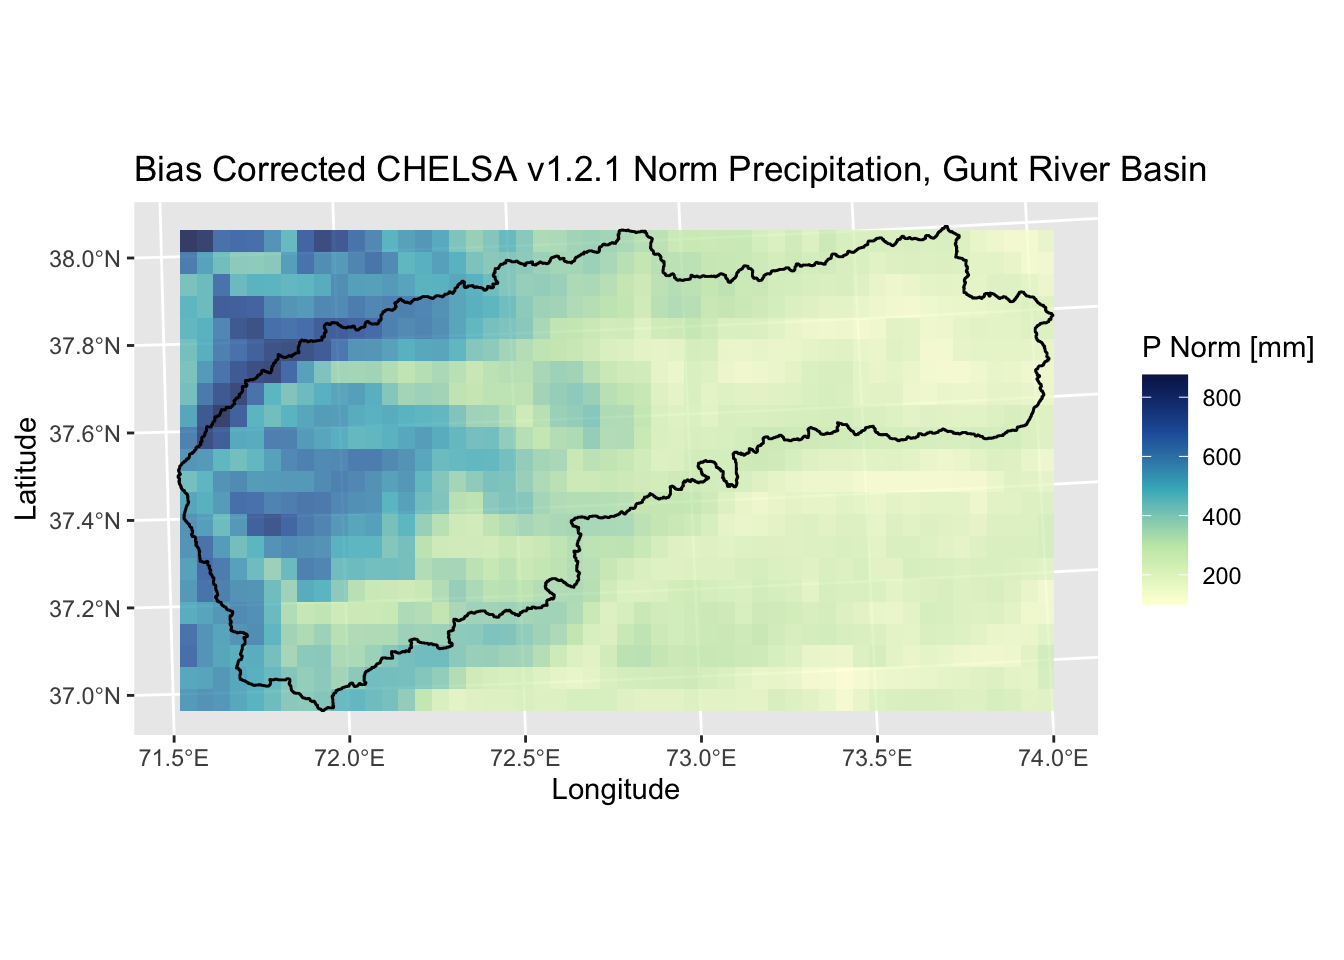 Long-term mean precipitation climatology of the Gunt river basin in the Pamir mountains. The catchment is delineated by the black polygon. The mean long-term precipitation in the catchment is 349 mm/year.